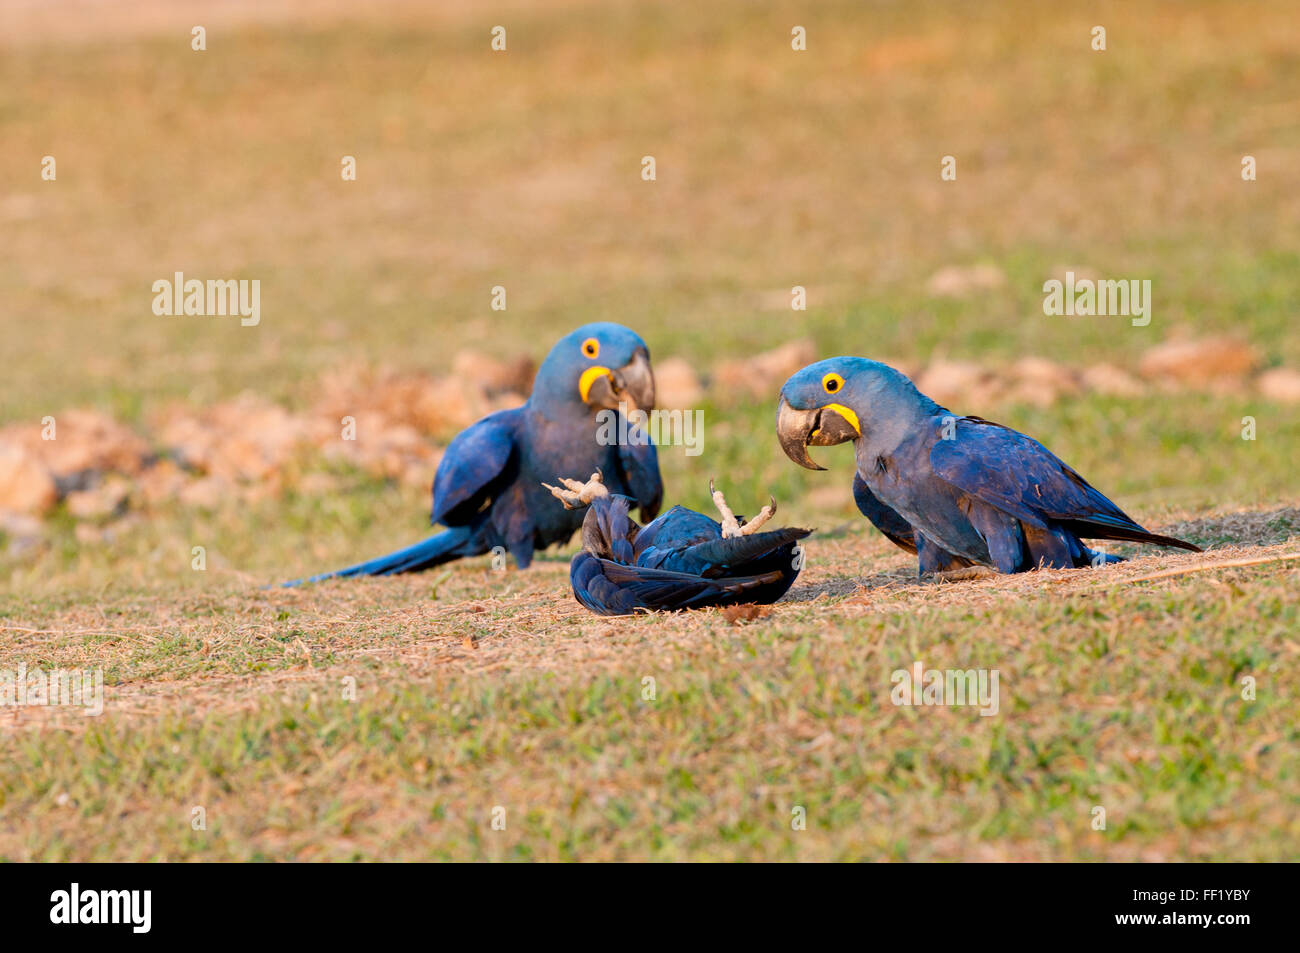 Hyacinth macaws (Anodorhynchus hyacinthinus) playing (bird in center 'playing dead') in the Brazilian Pantanal Stock Photo